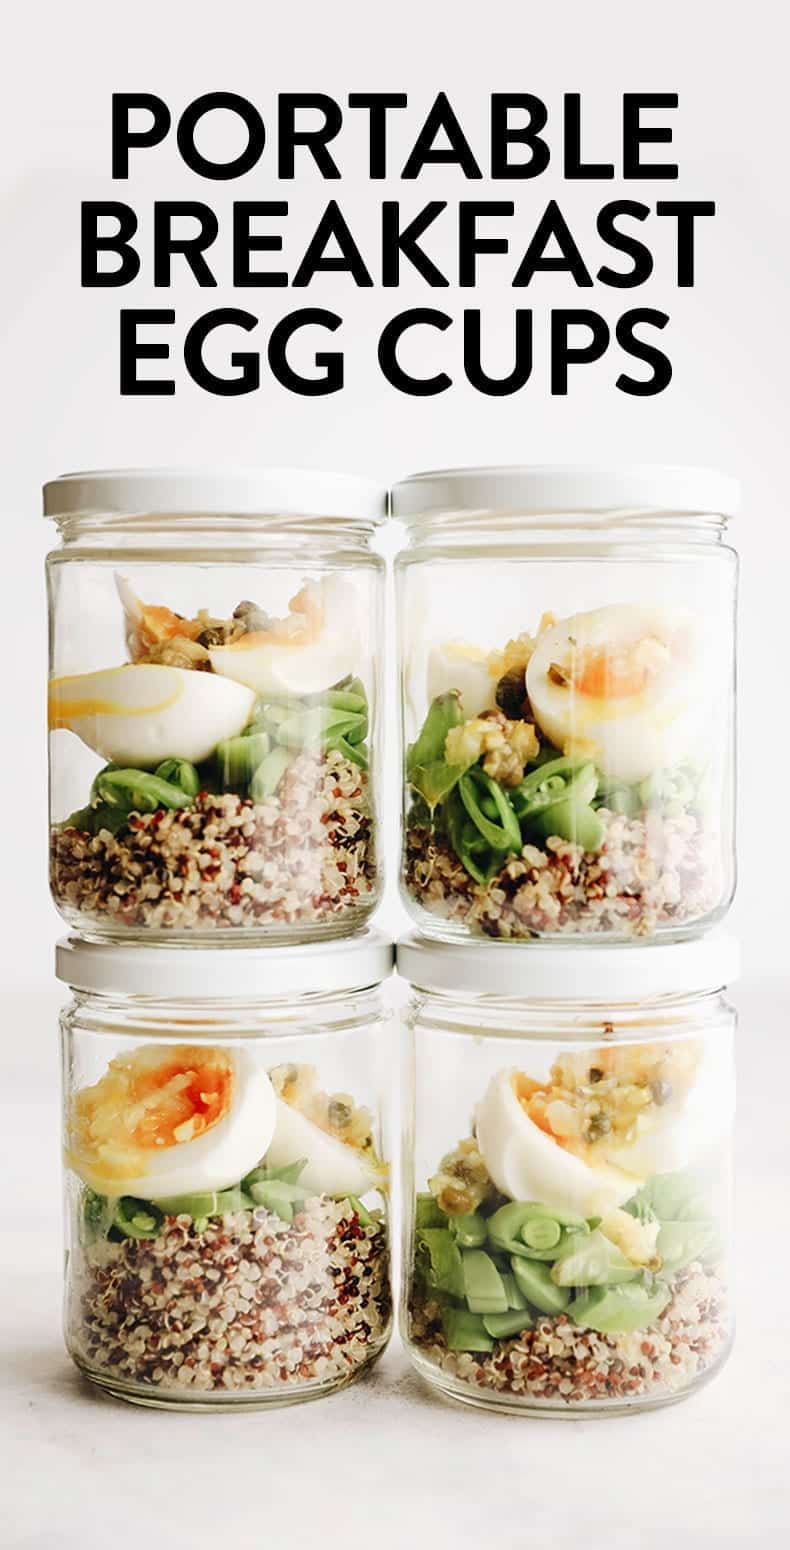 A graphic with the title "portable breakfast egg cups". Below the title is four jars filled with quinoa, snap peas, soft boiled eggs and a sauce. The jars are stacked 2x2.